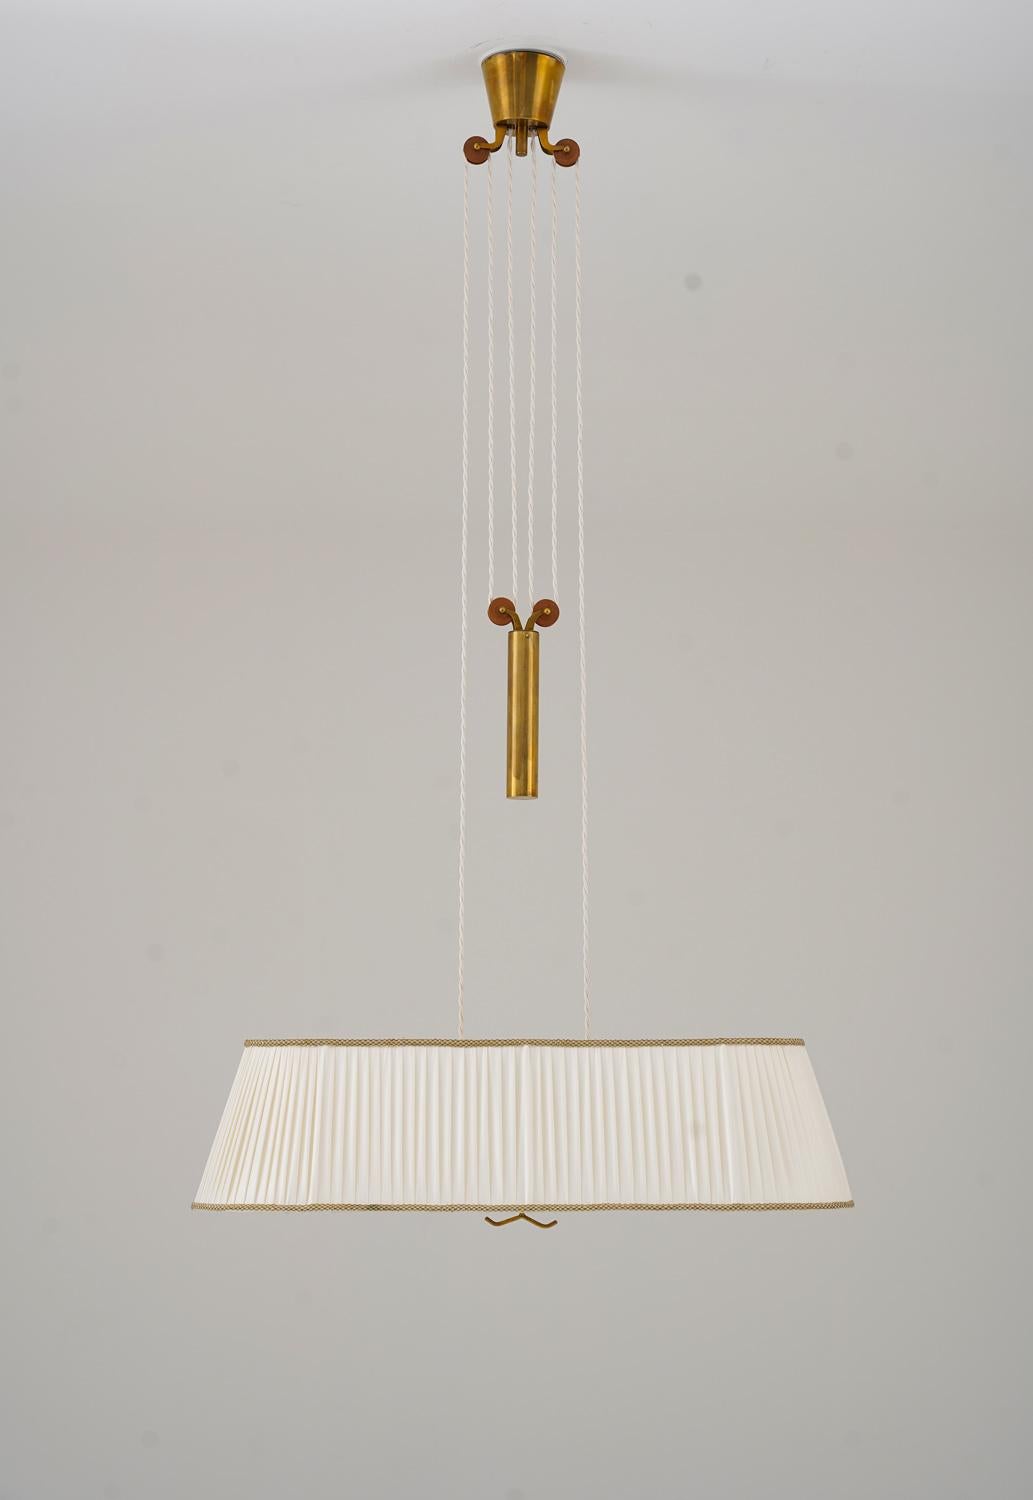 Rare pendant model 11827 by Harald Notini for Böhlmarks, Sweden
This elegant pendant consists of a brass canopy and counter weight, that allows you to adjust the lamp to the height you prefer. The four light sources are hidden by a large pleated